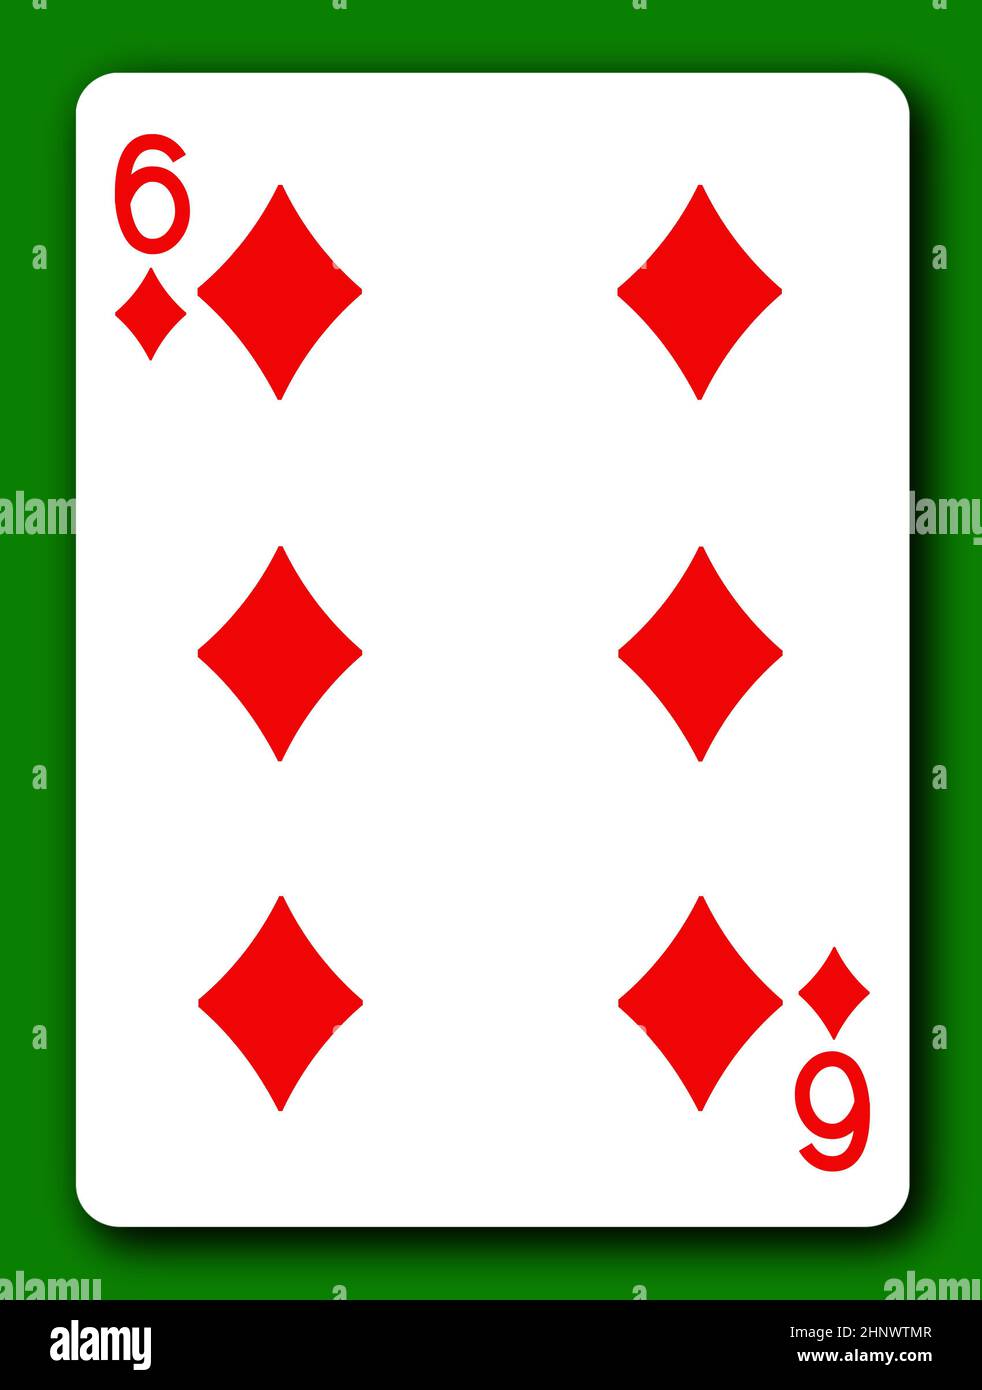 A 6 Six of Diamonds playing card with clipping path to remove background and shadow 3d illustration Stock Photo